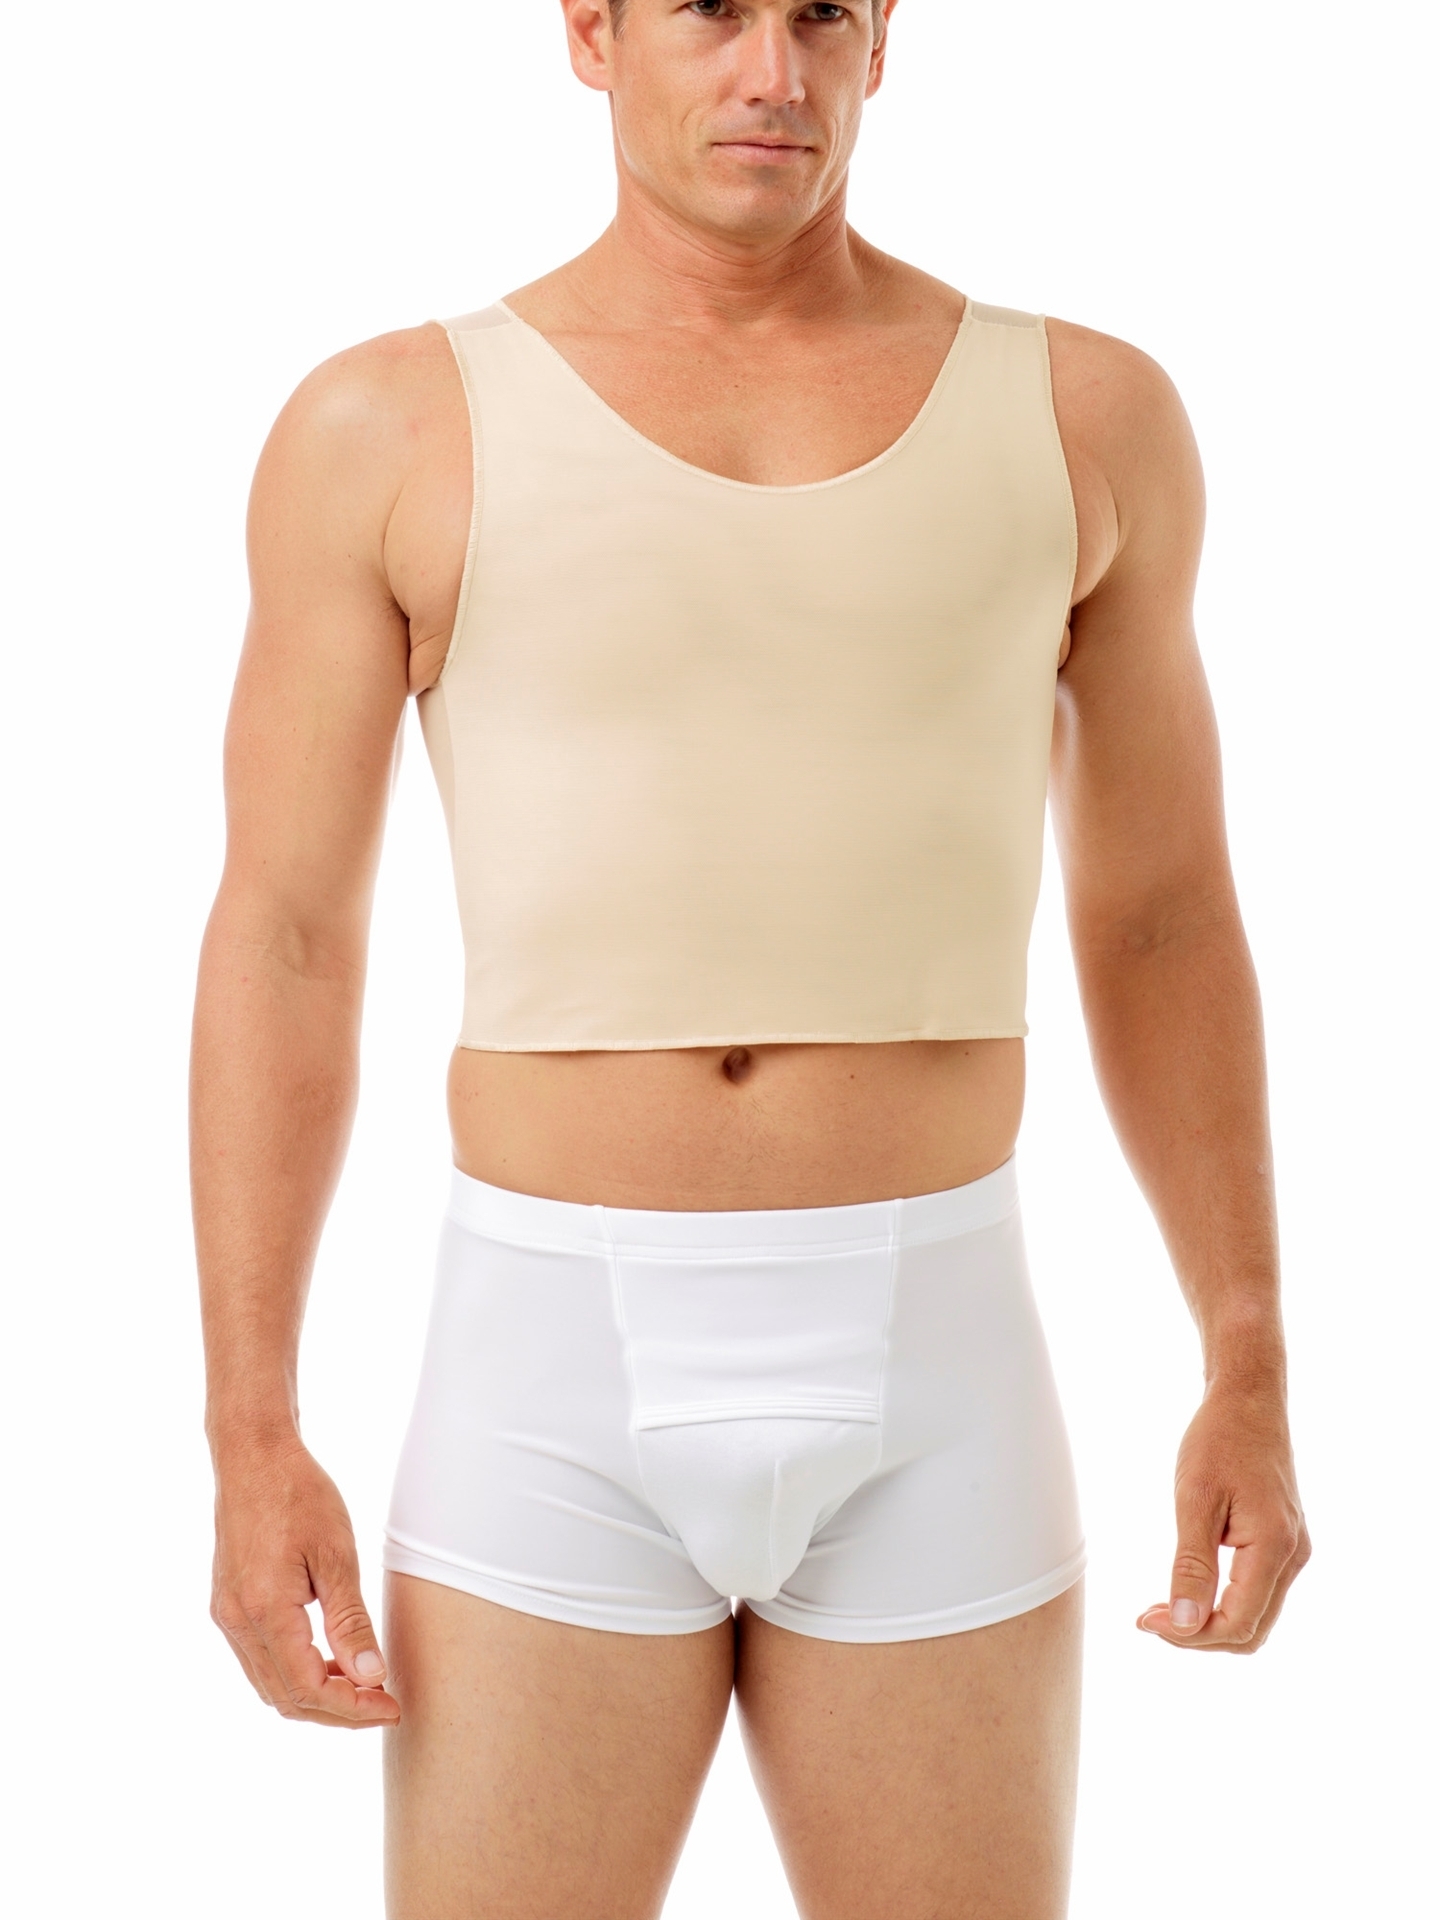 Tri-top Chest Binder - provide maximum comfortable and extreme chest binding..  Men Compression Shirts, Girdles, Chest Binders, Hernia Garments